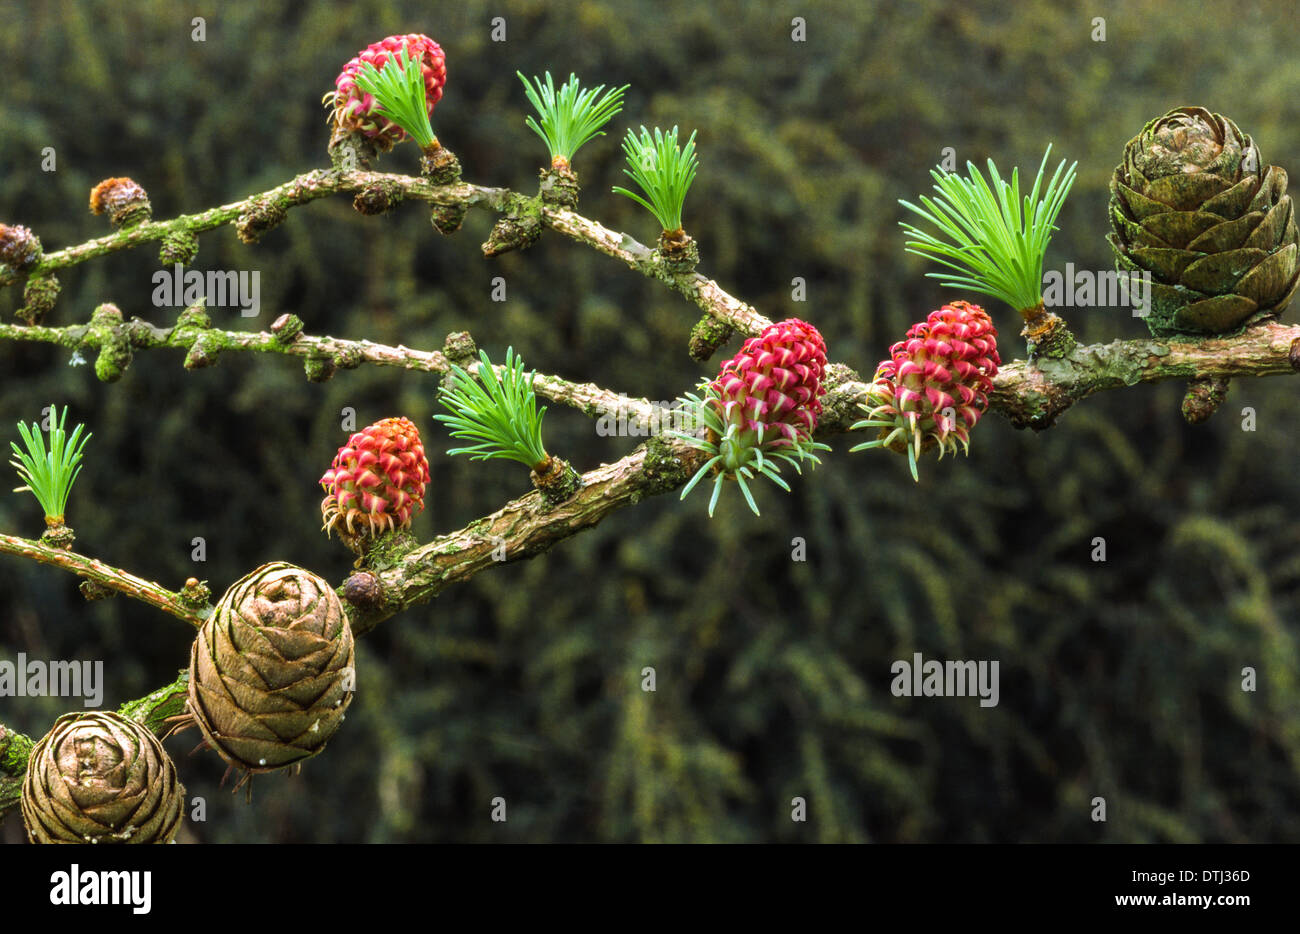 LARCH TREE [ LARIX ] FLOWERS NEEDLES AND CONES IN SPRING Stock Photo